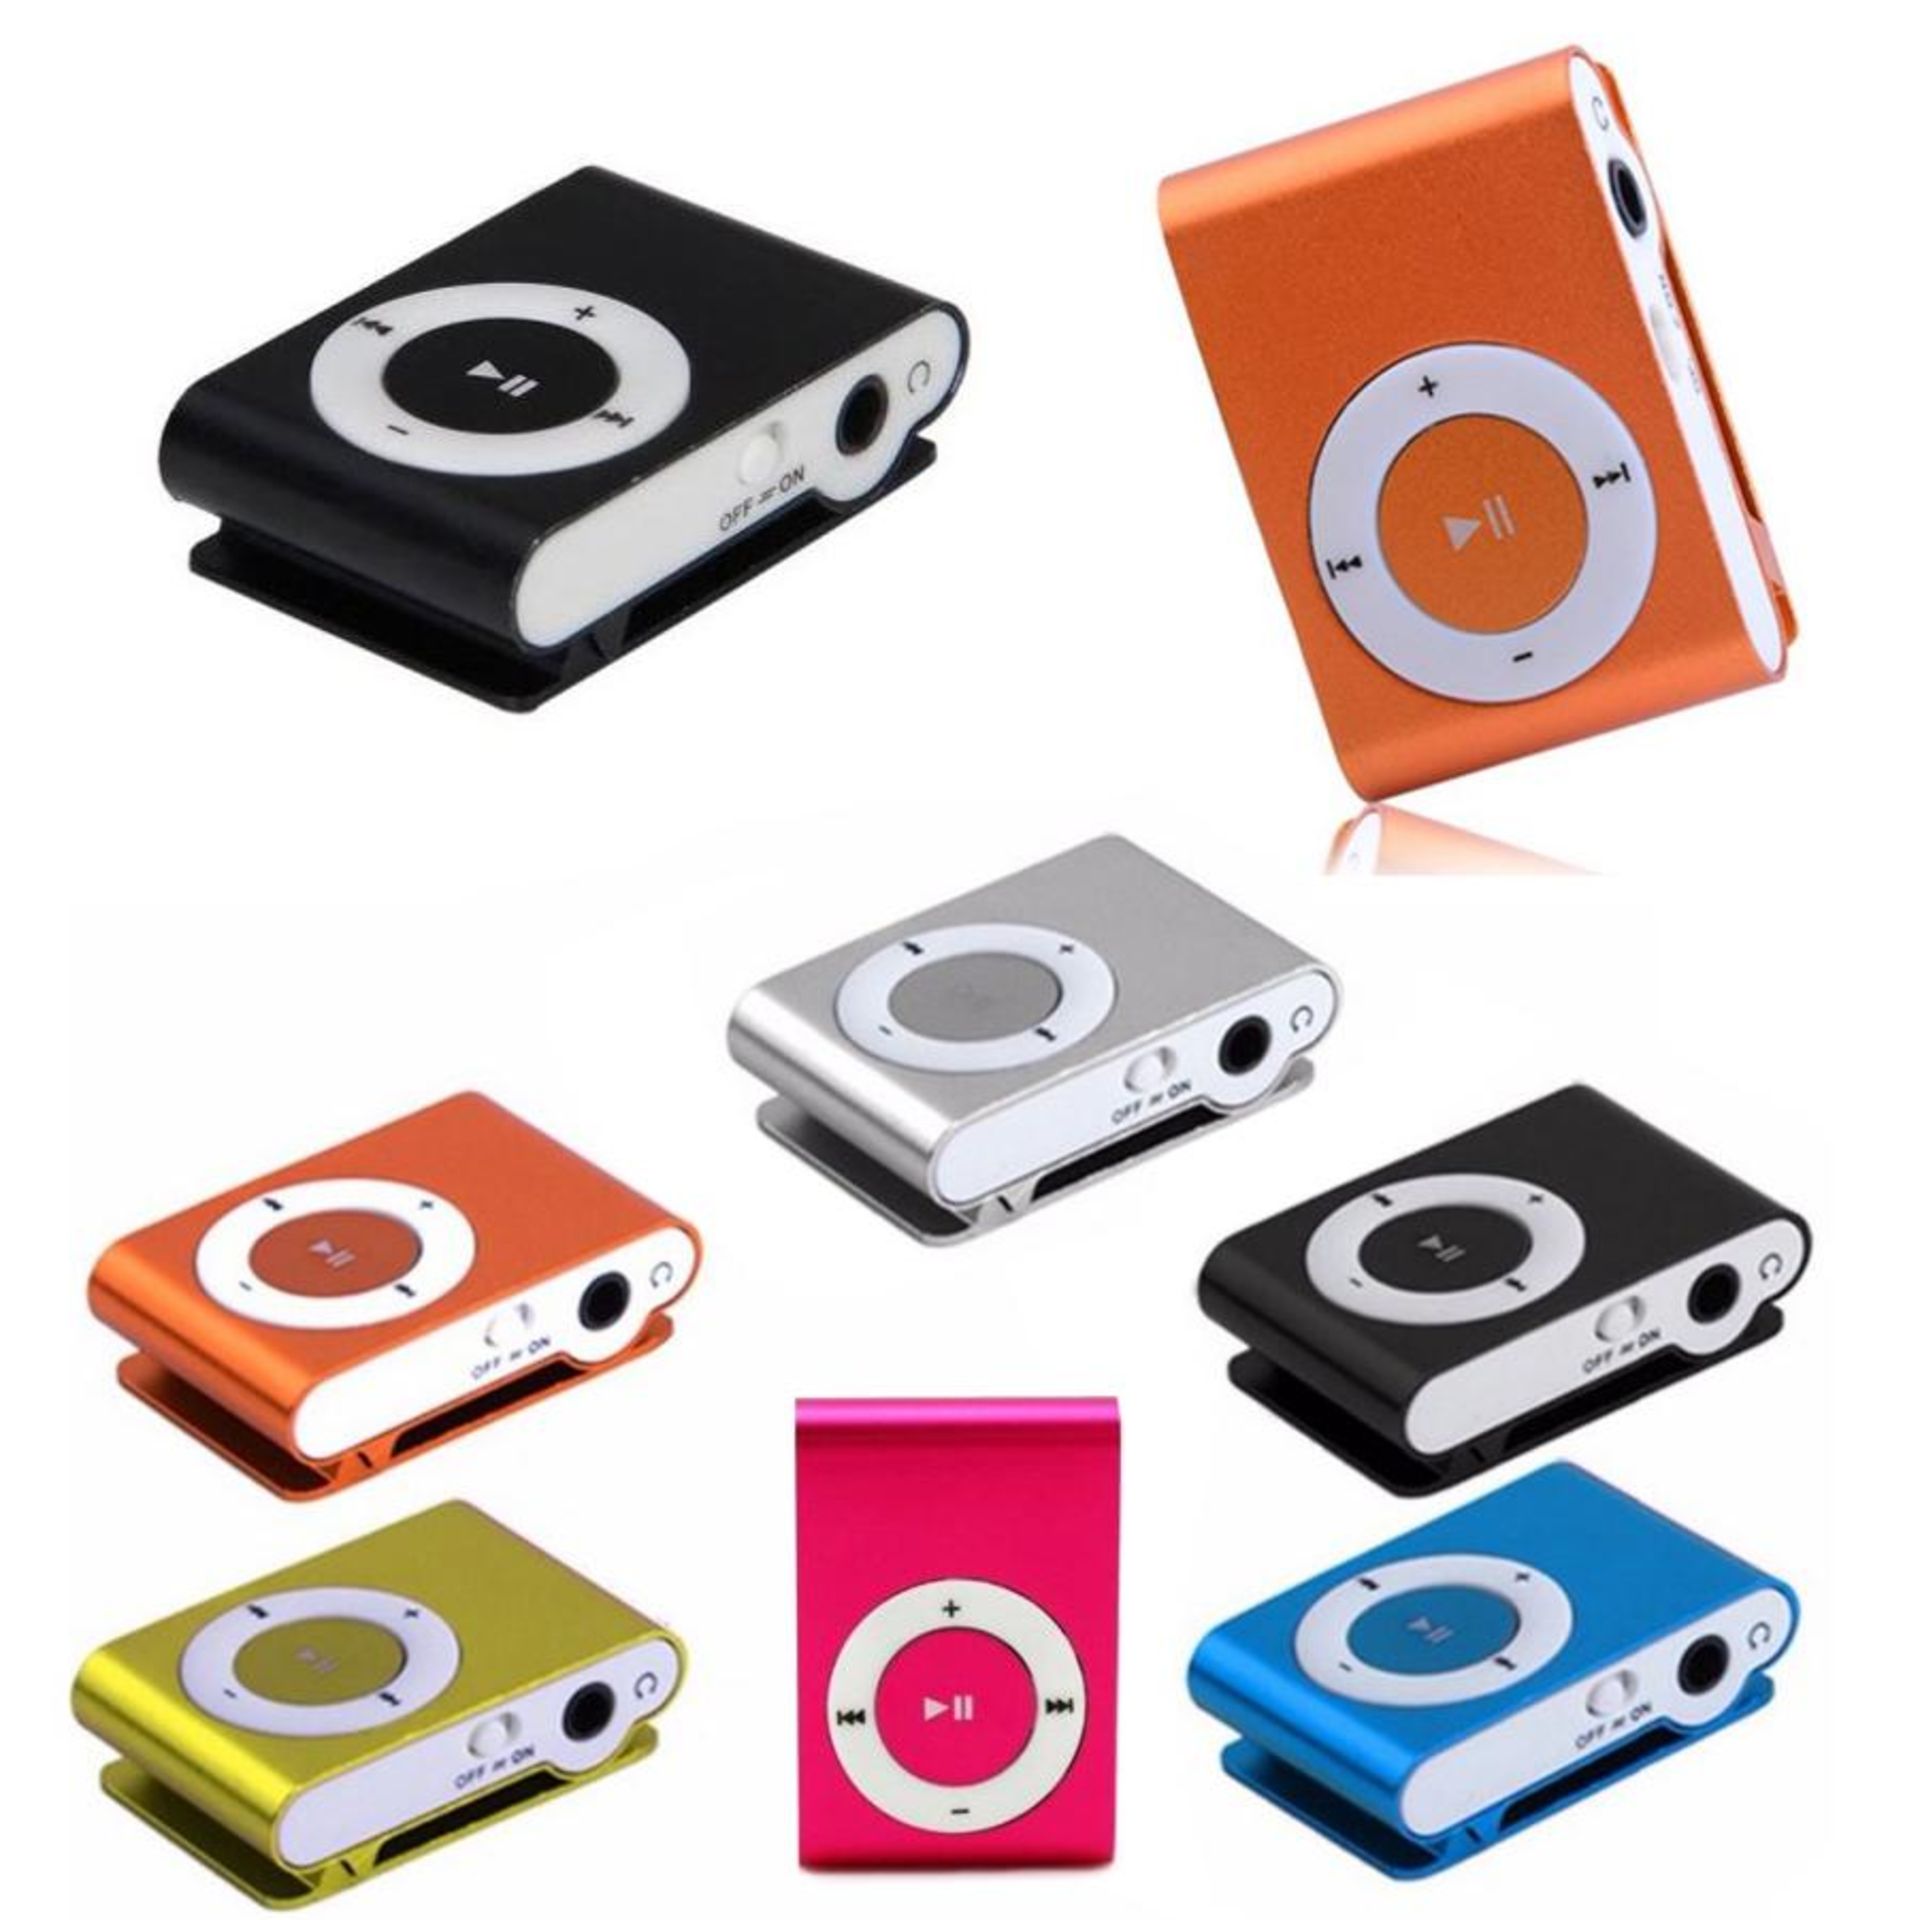 Brand New Mini Clip Digital USB MP3 Player With SD Card Slot - Ideal For Sports/Outdoor Pursuits -